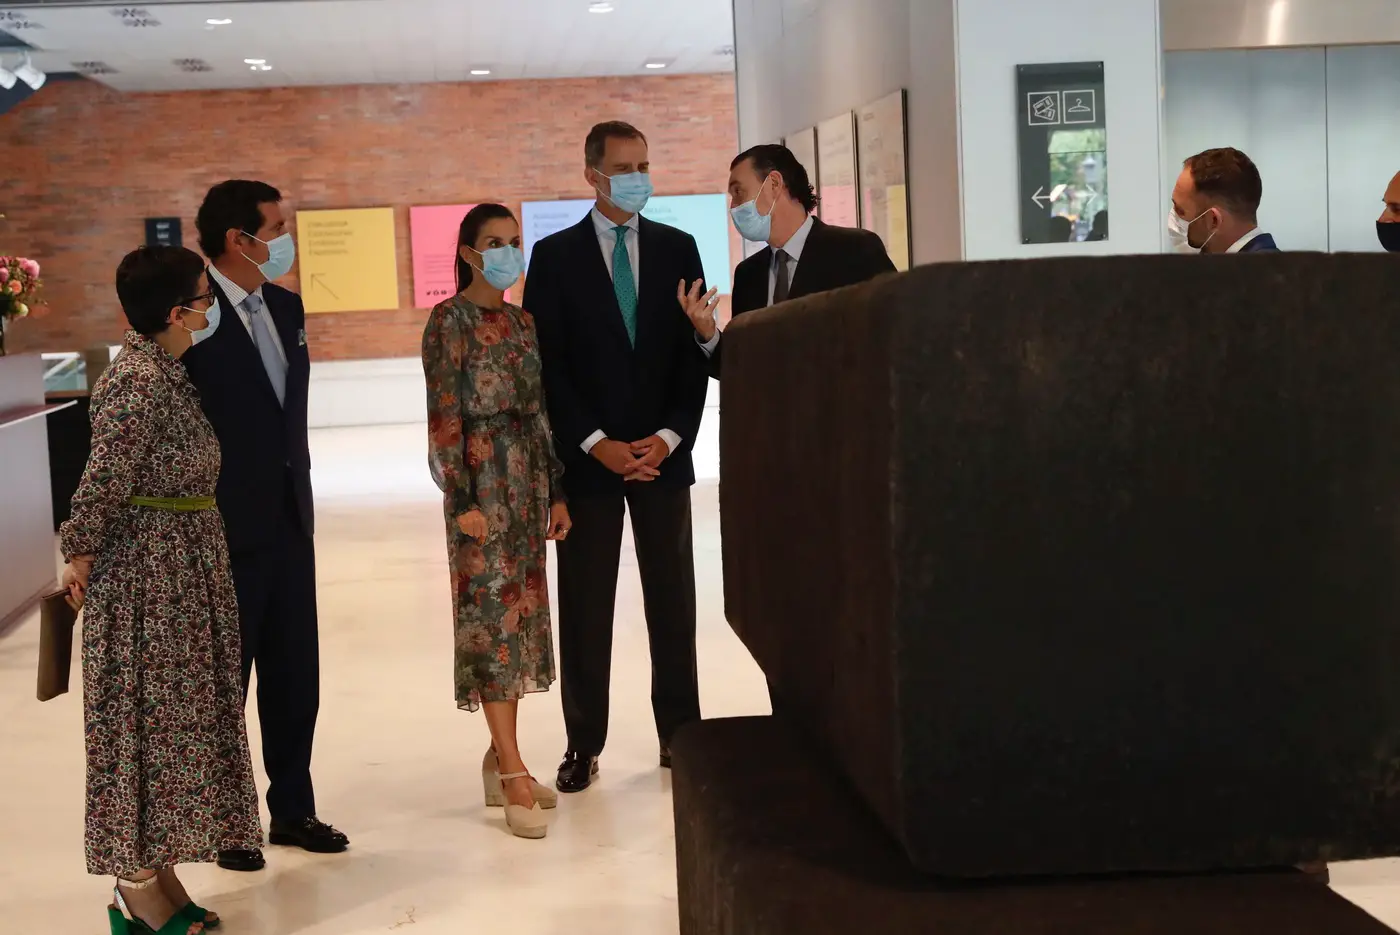 King Felipe and Queen Letizia of Spain during their tour of the Bilbao Fine Arts Museum